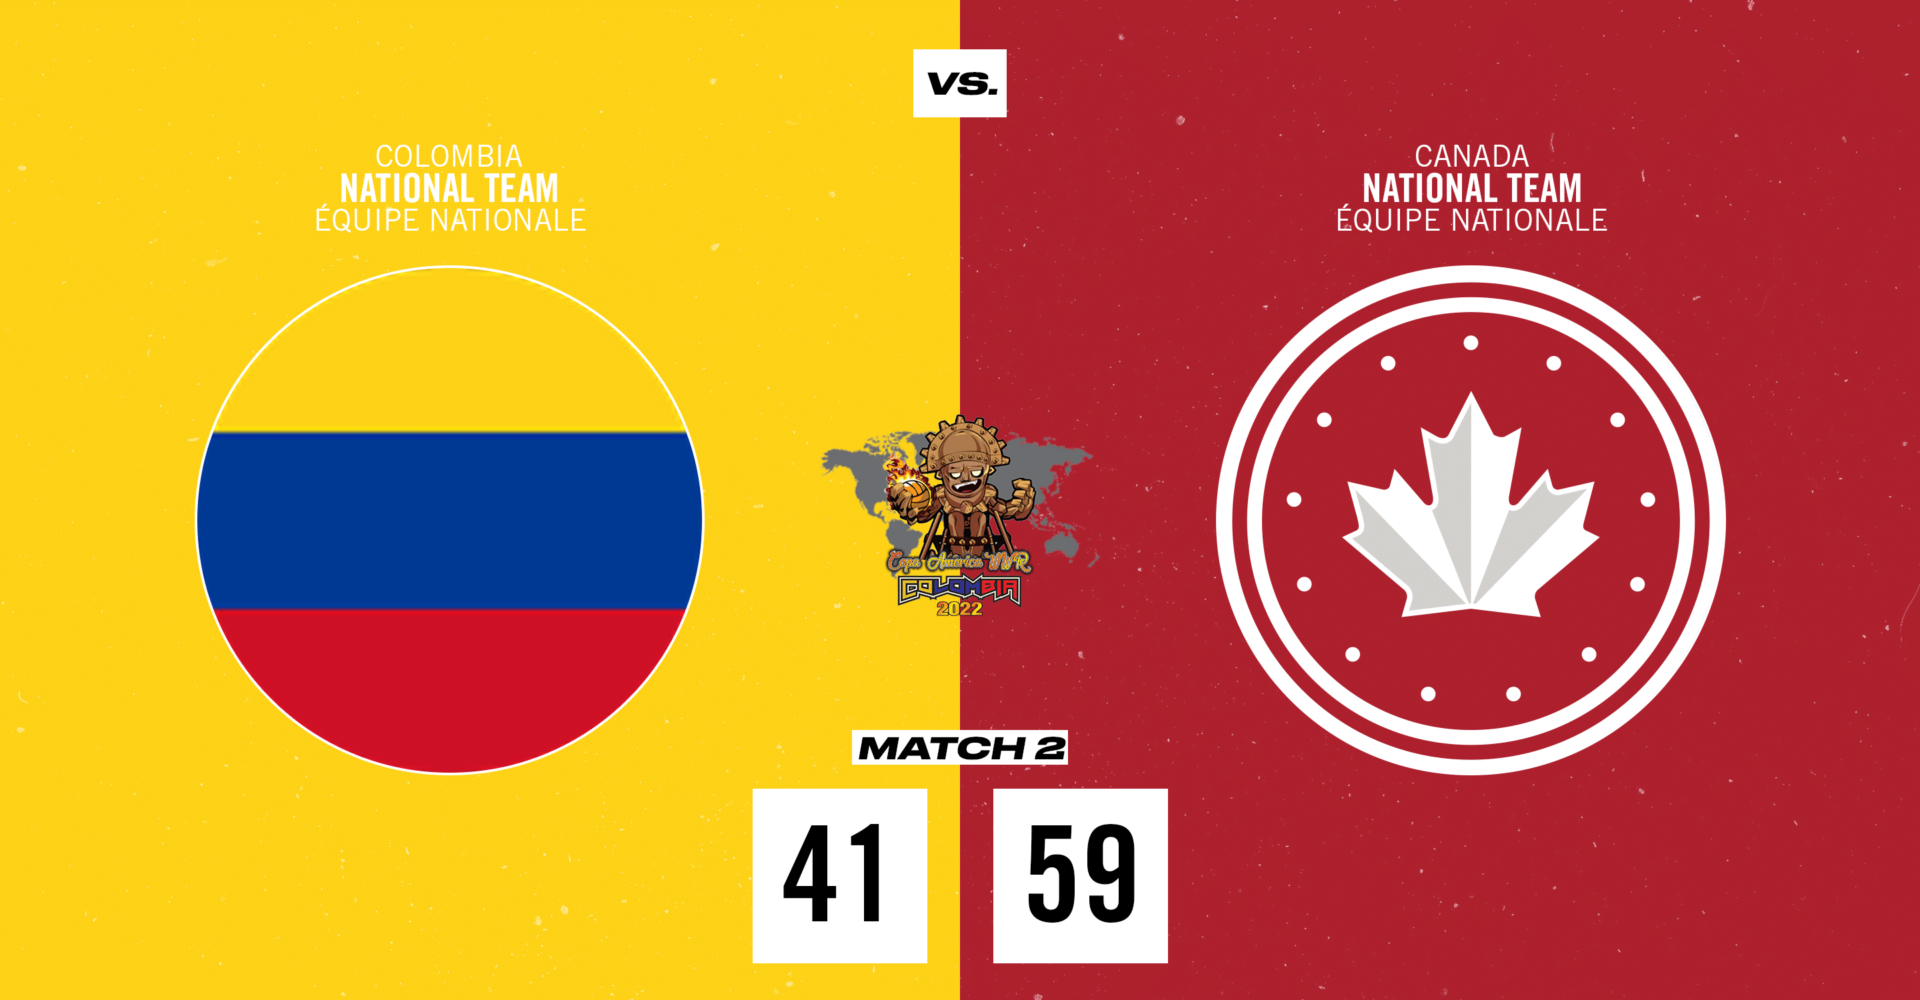 Canada Defeats Colombia 59-41 in Game 2 of Americas Championship